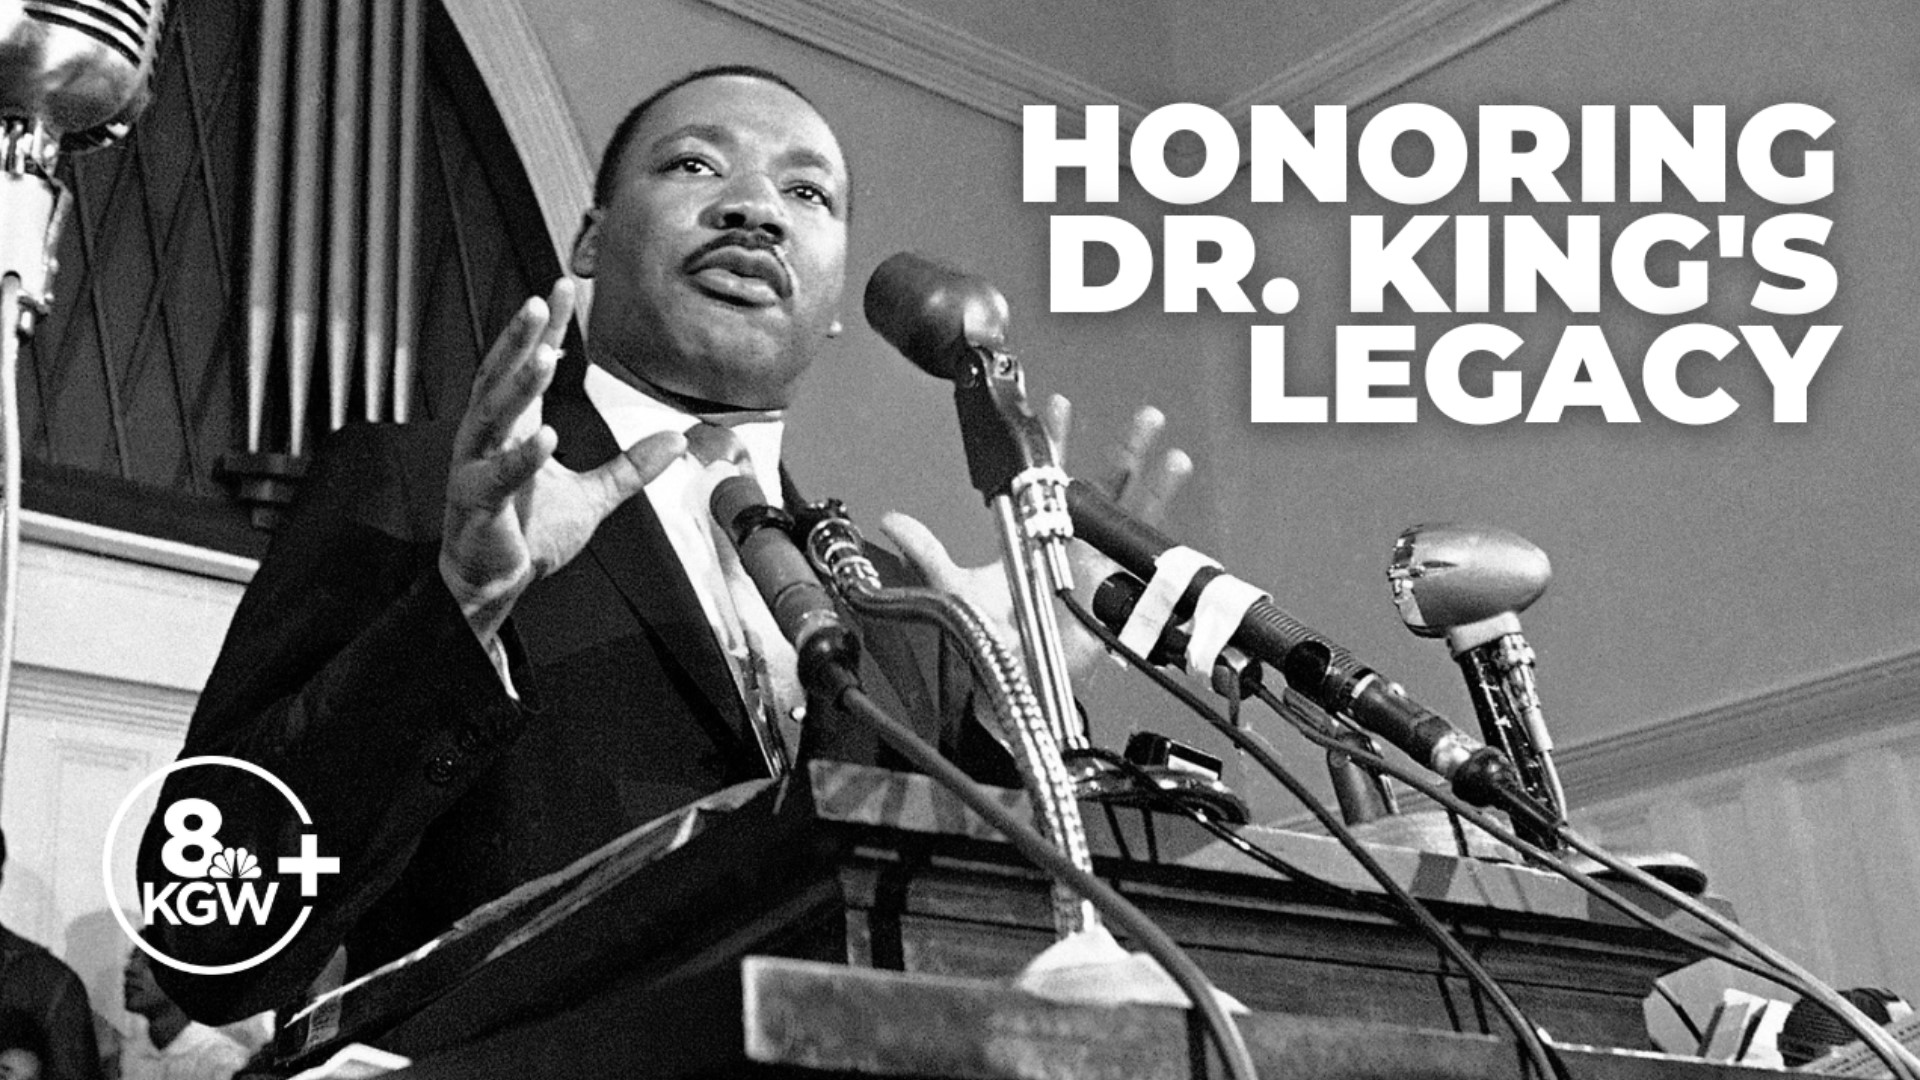 Celebrating the life and legacy of Dr. Martin Luther King Jr